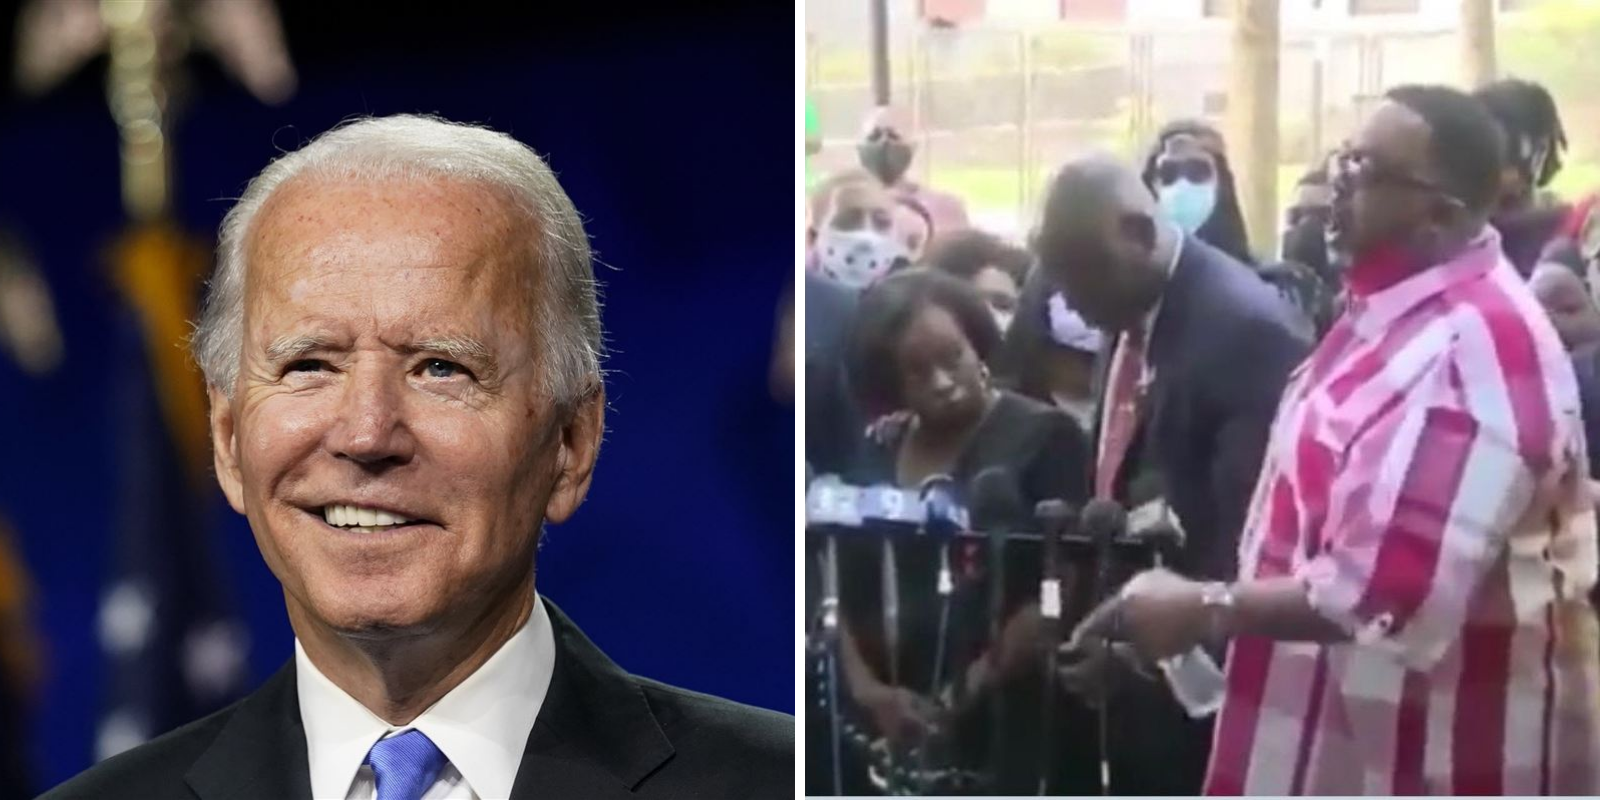 Jacob Blake's father revealed to be anti-Semitic—Biden still scheduled to meet with him